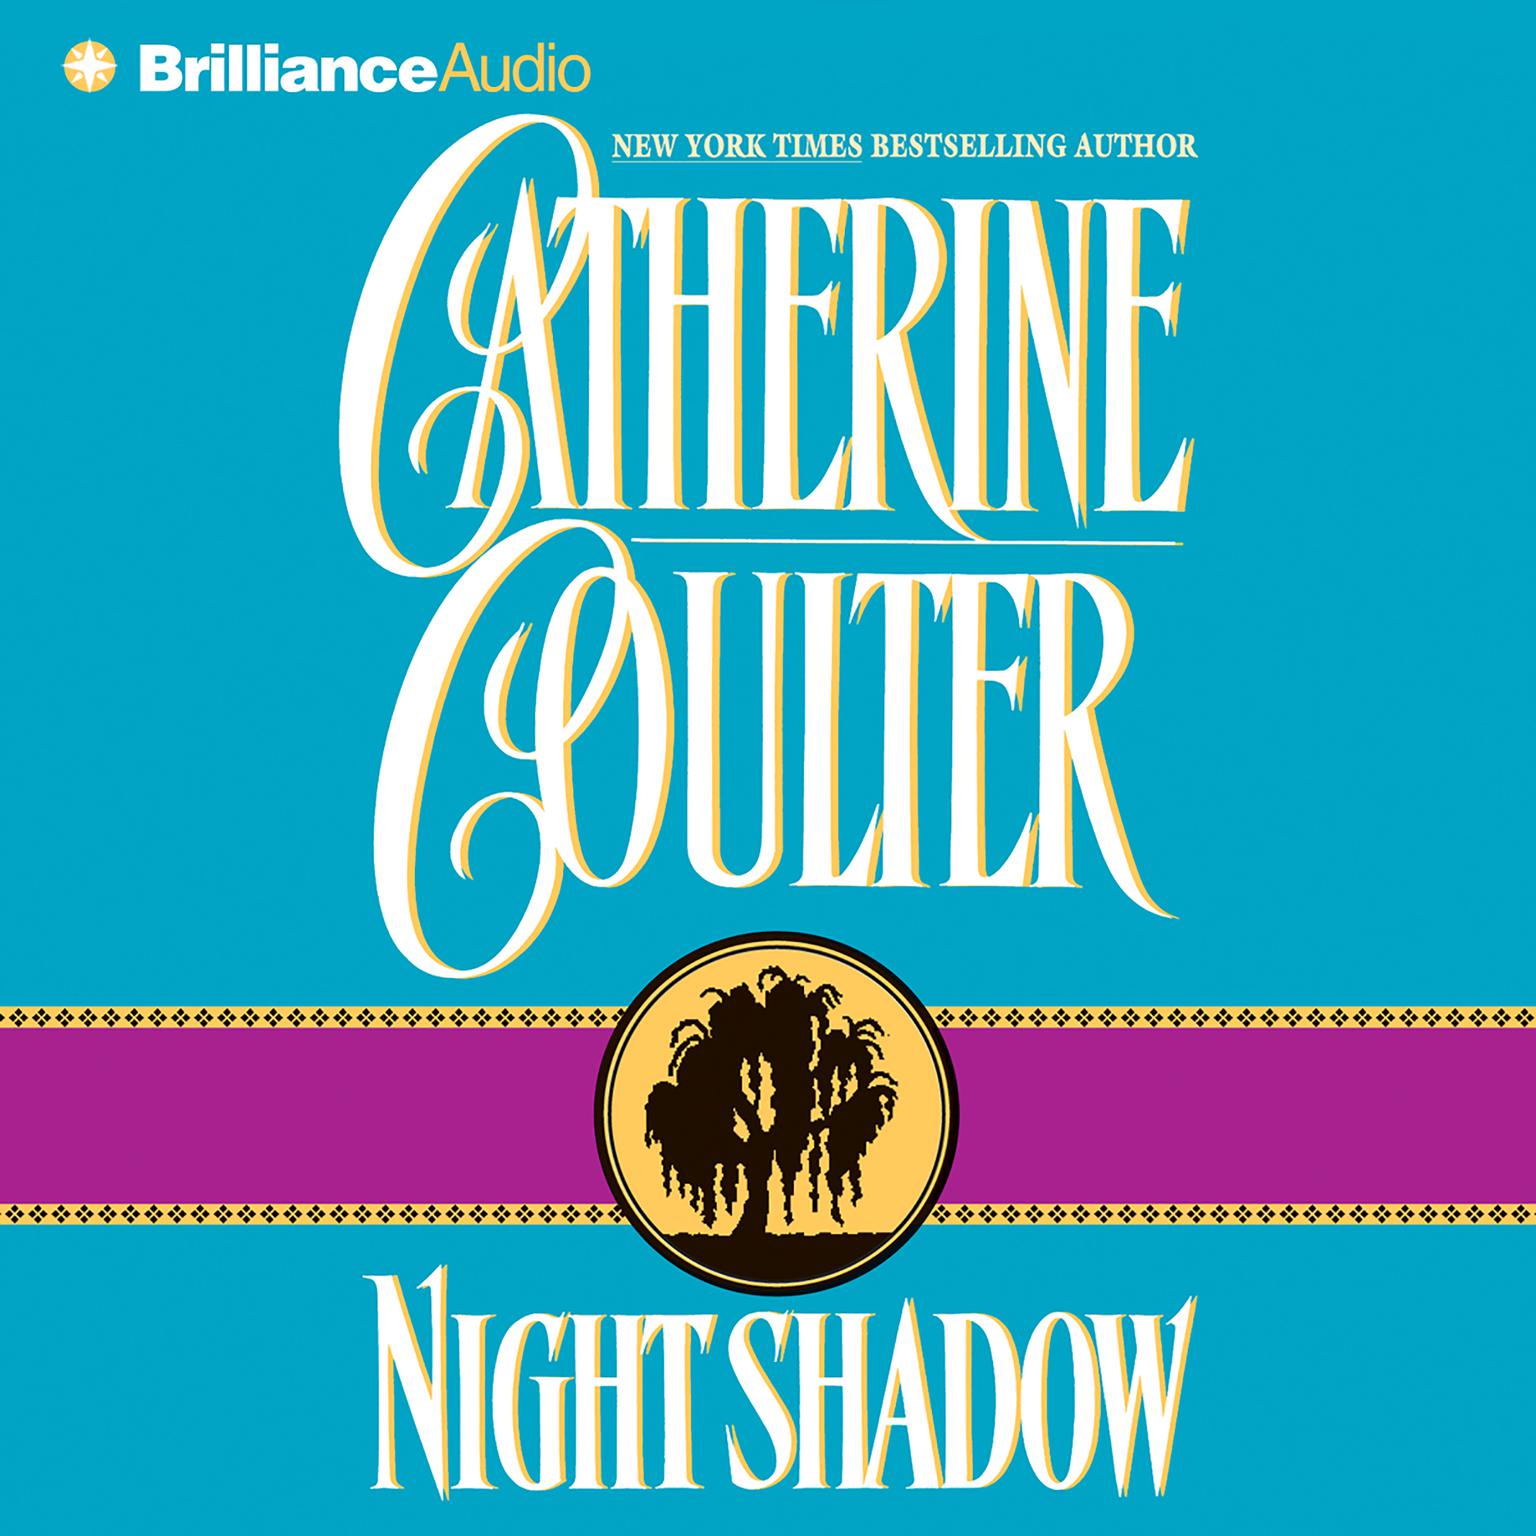 Night Shadow (Abridged) Audiobook, by Catherine Coulter